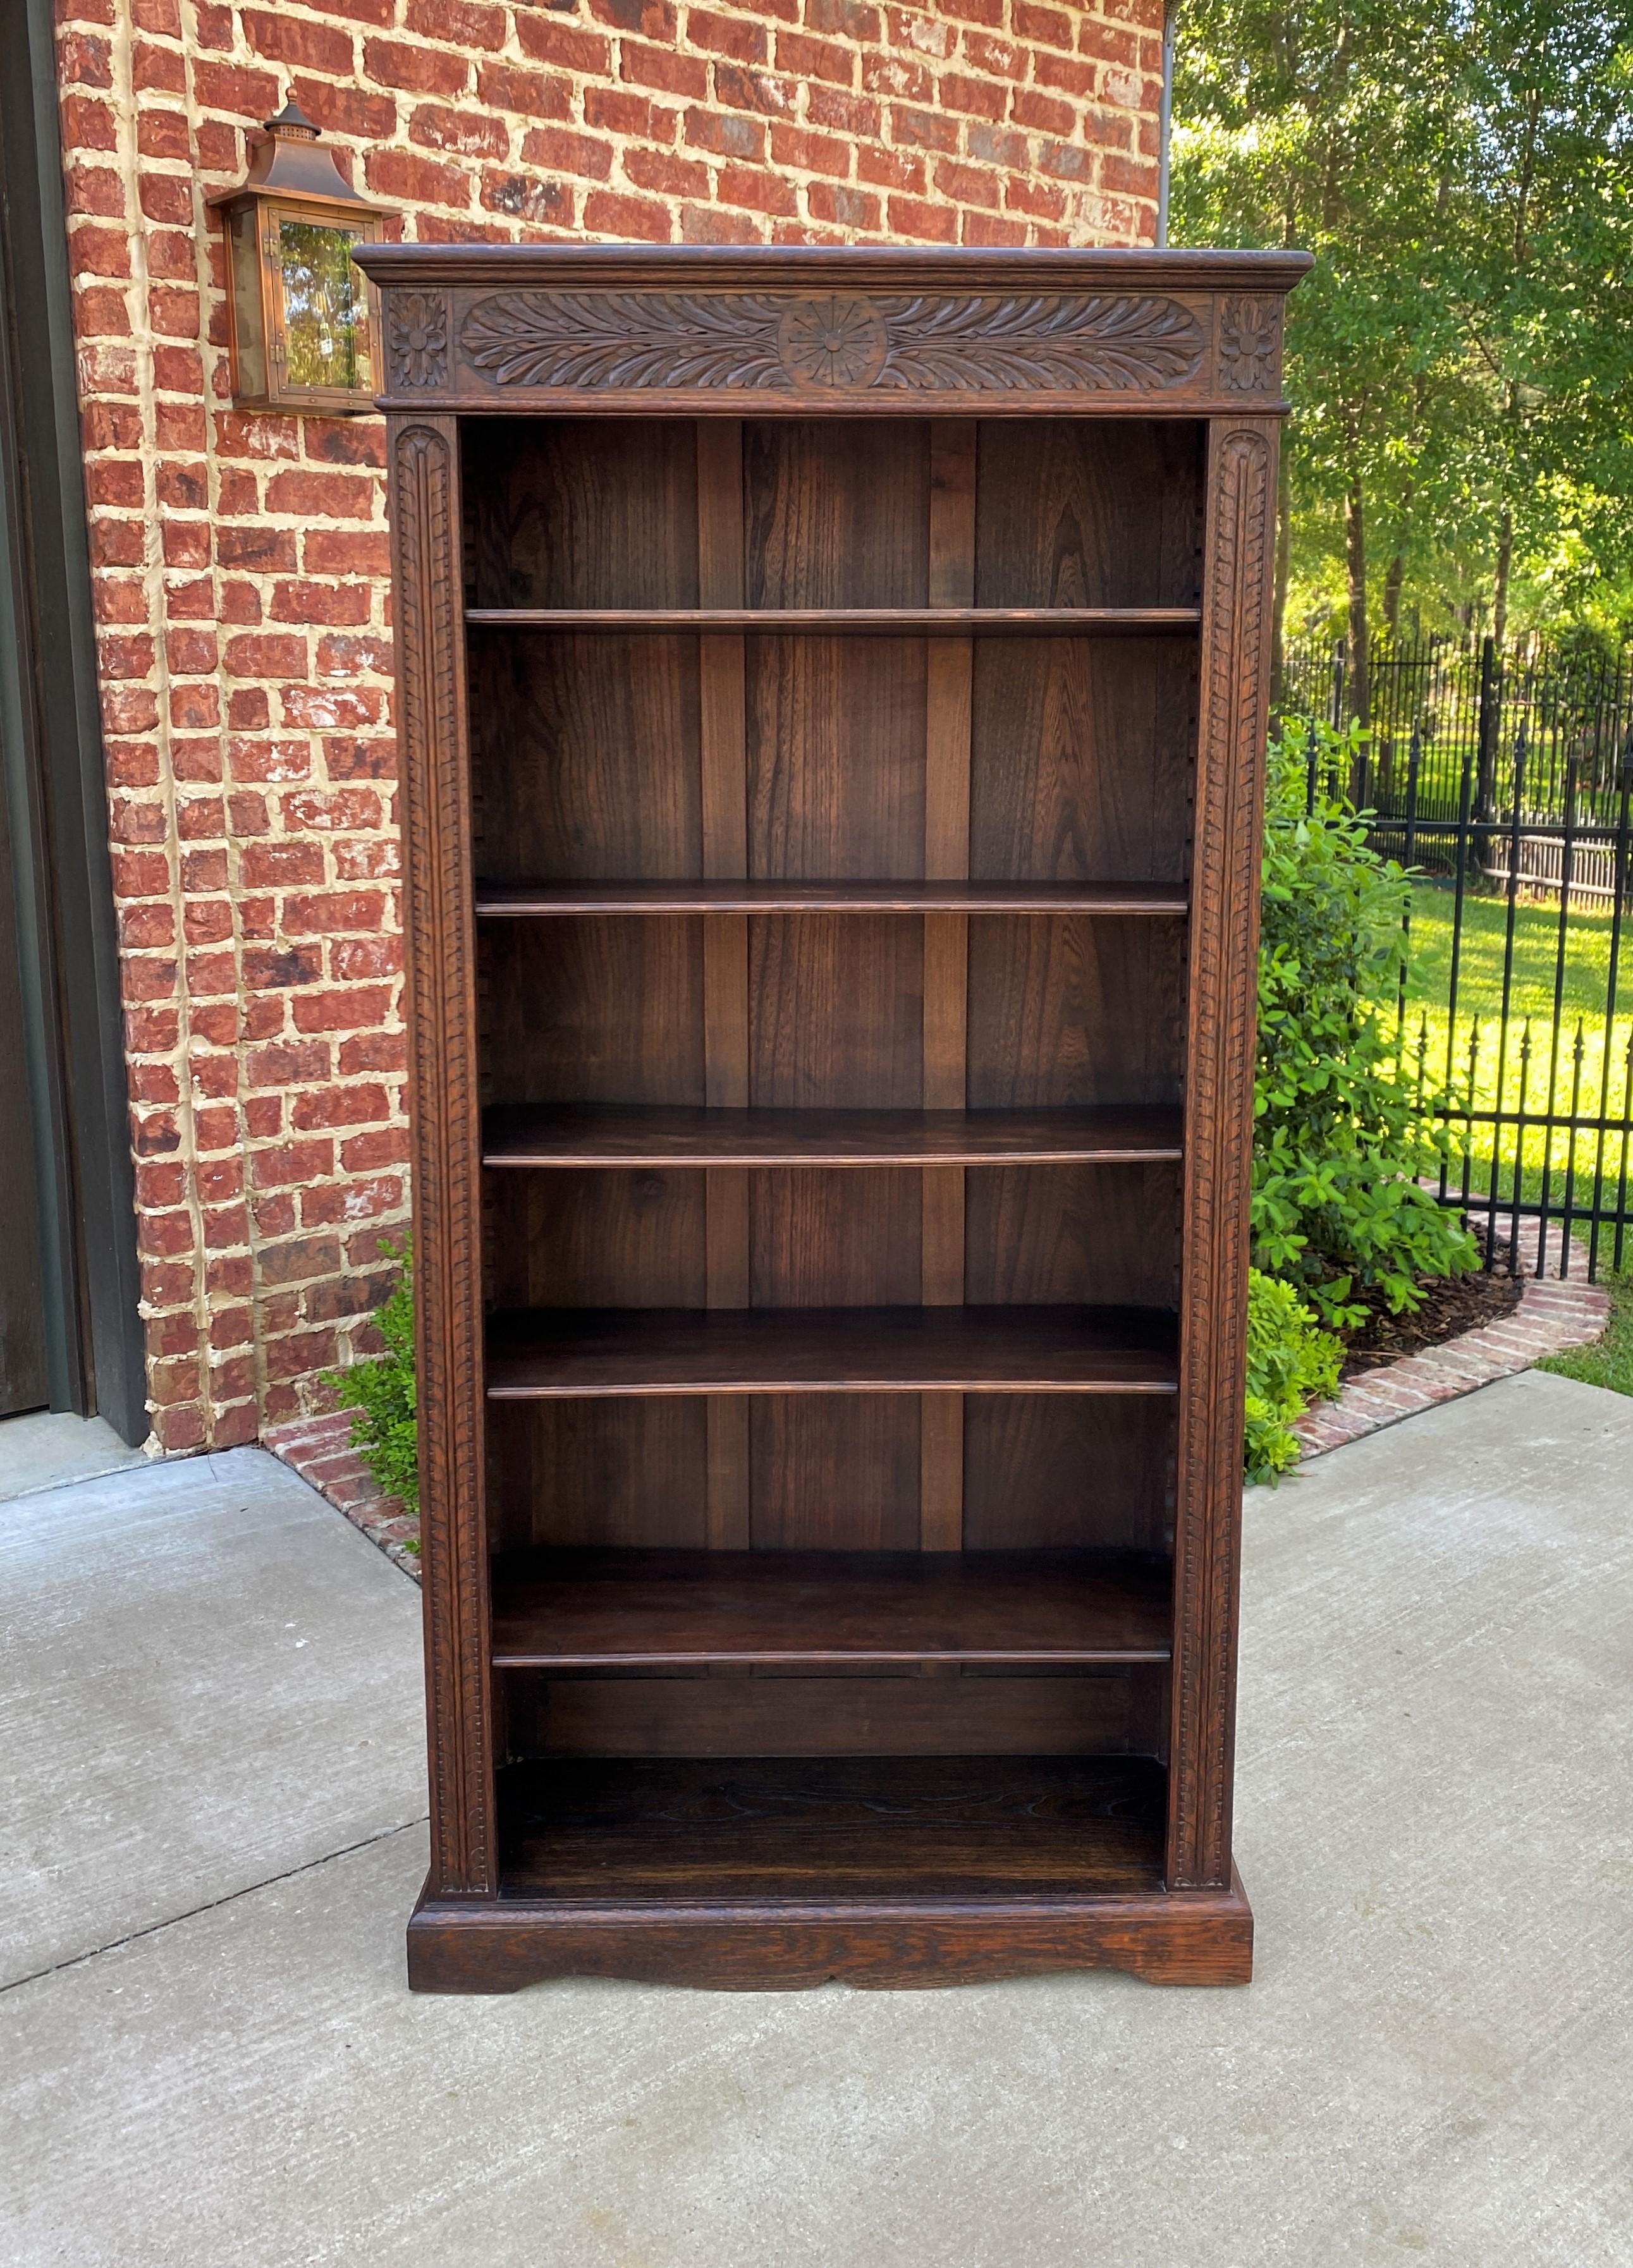 Beautiful antique English oak freestanding bookcase, display shelf, or cabinet~~c. 1920s

Perfect for displaying your favorite antique collectibles or as a bookcase~~top above shelves is flat for additional display

5 removable/adjustable